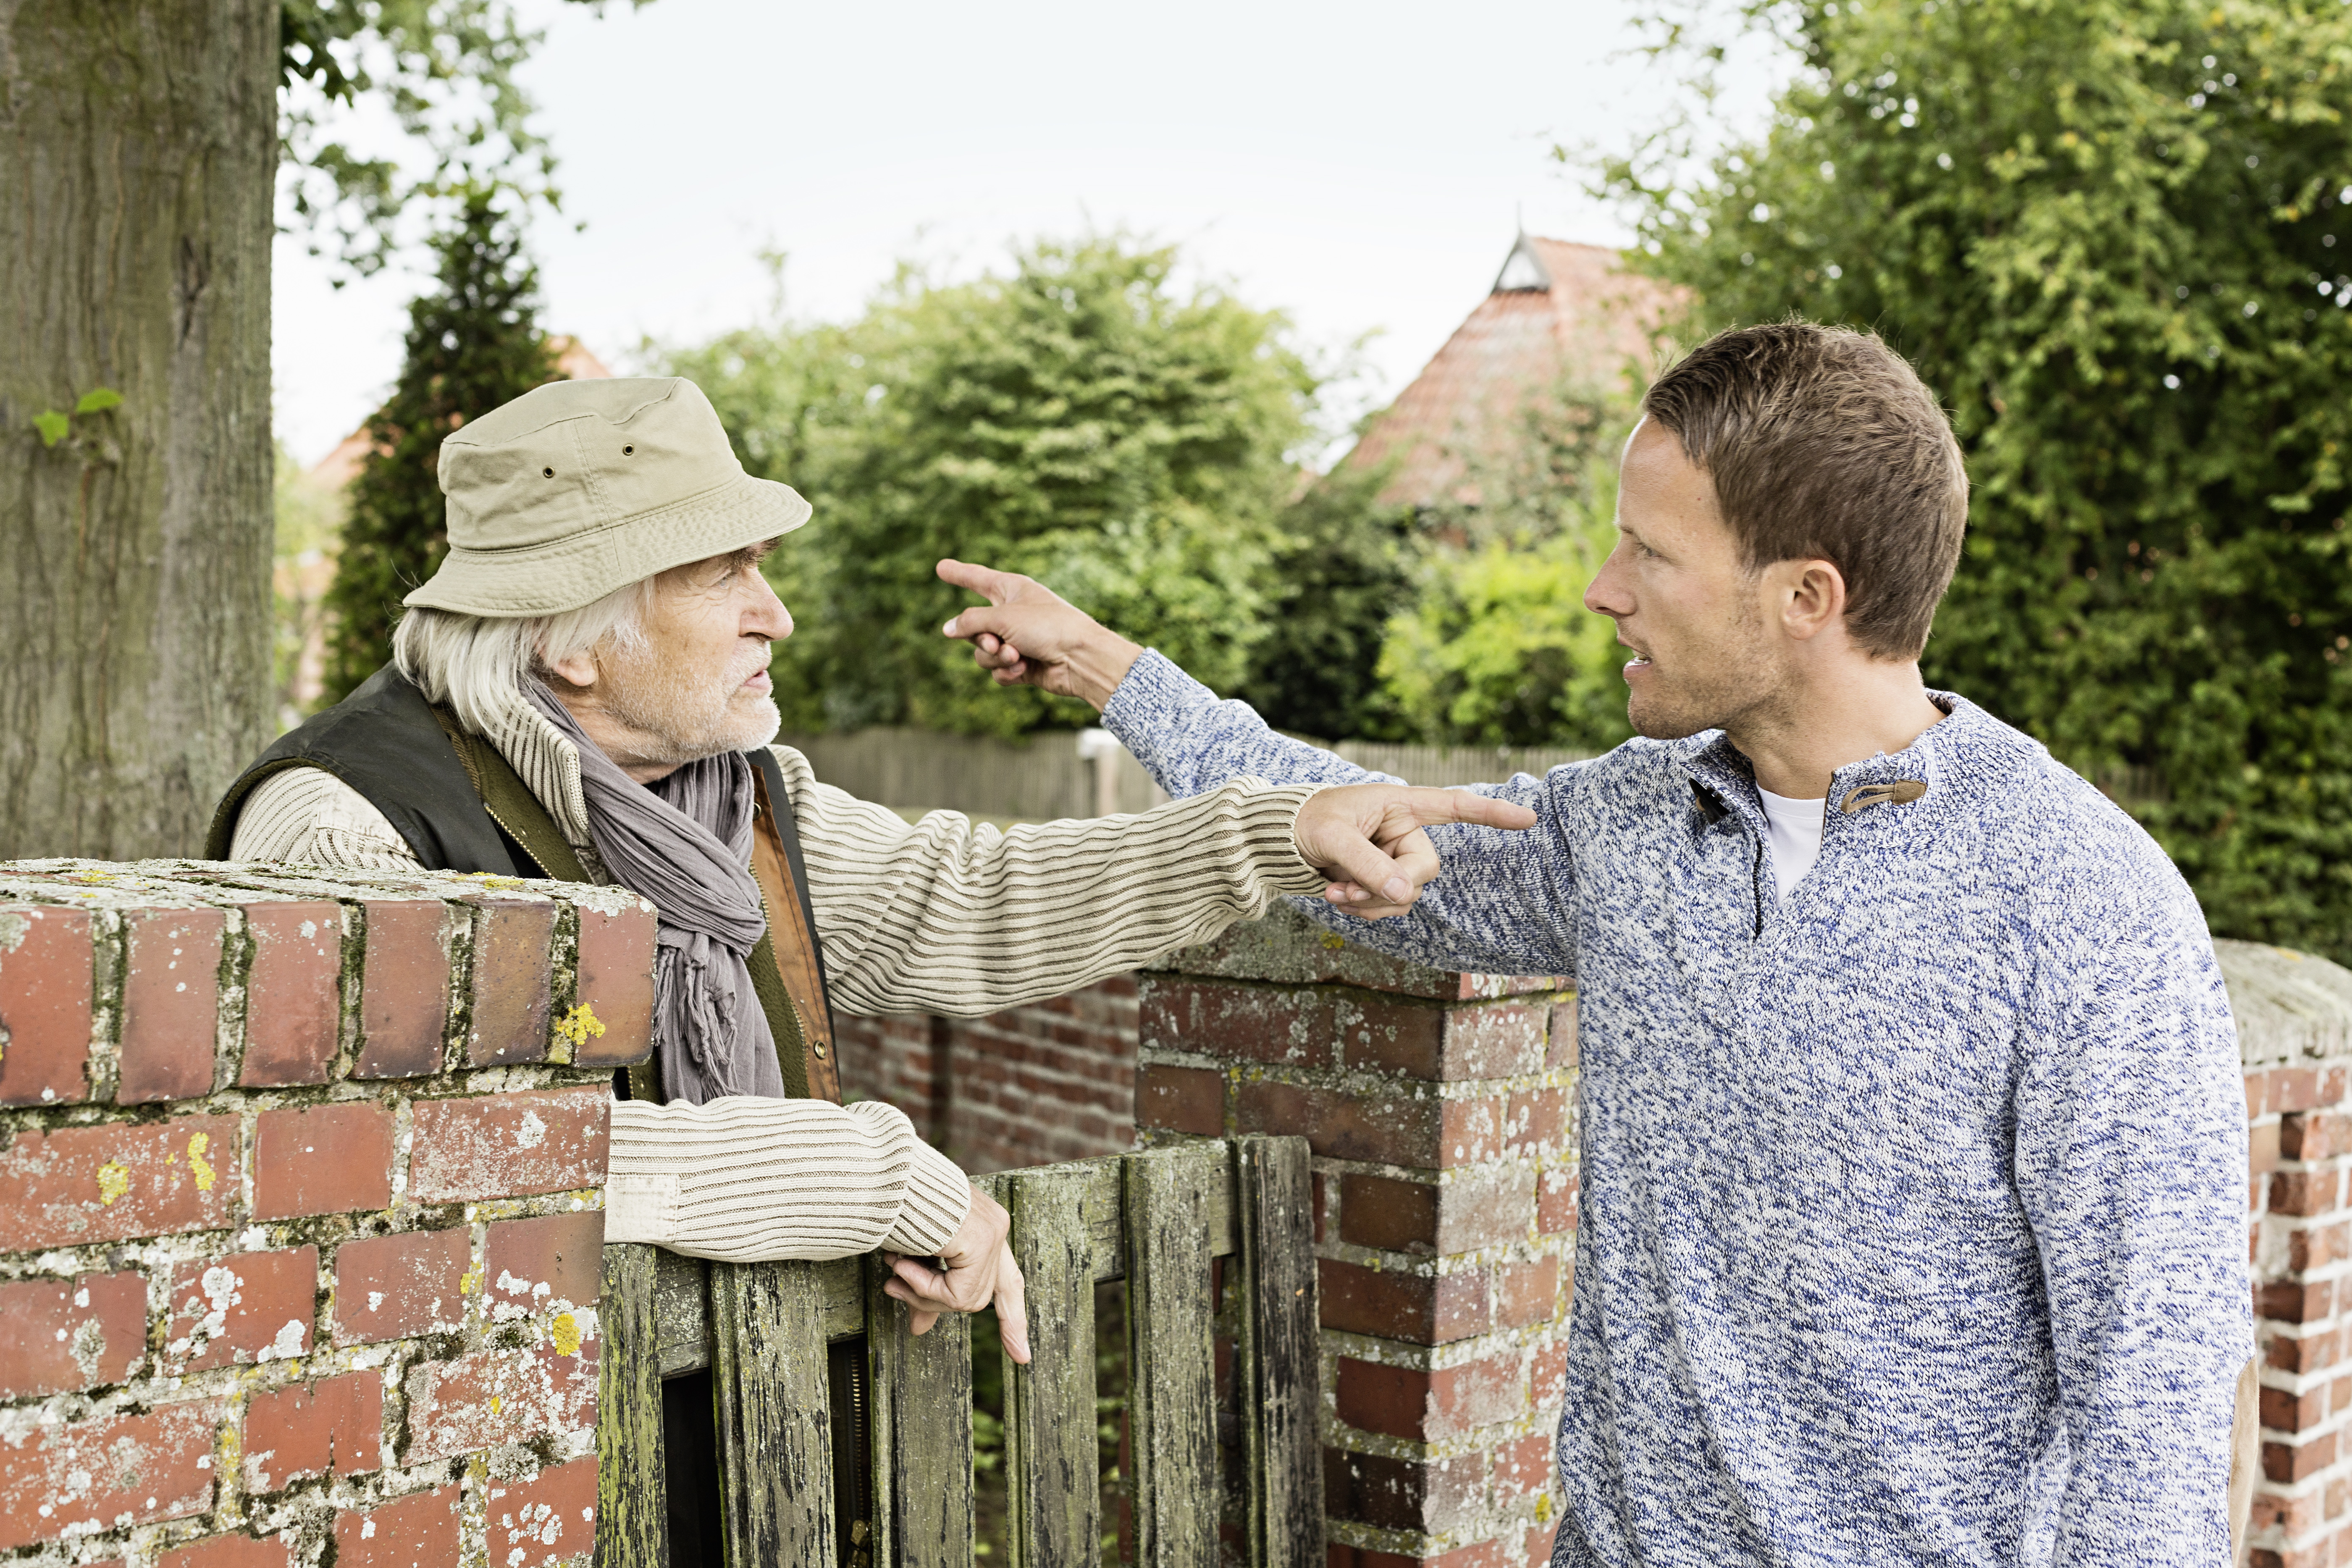 A senior citizen and adult man having an argument | Source: Getty Images